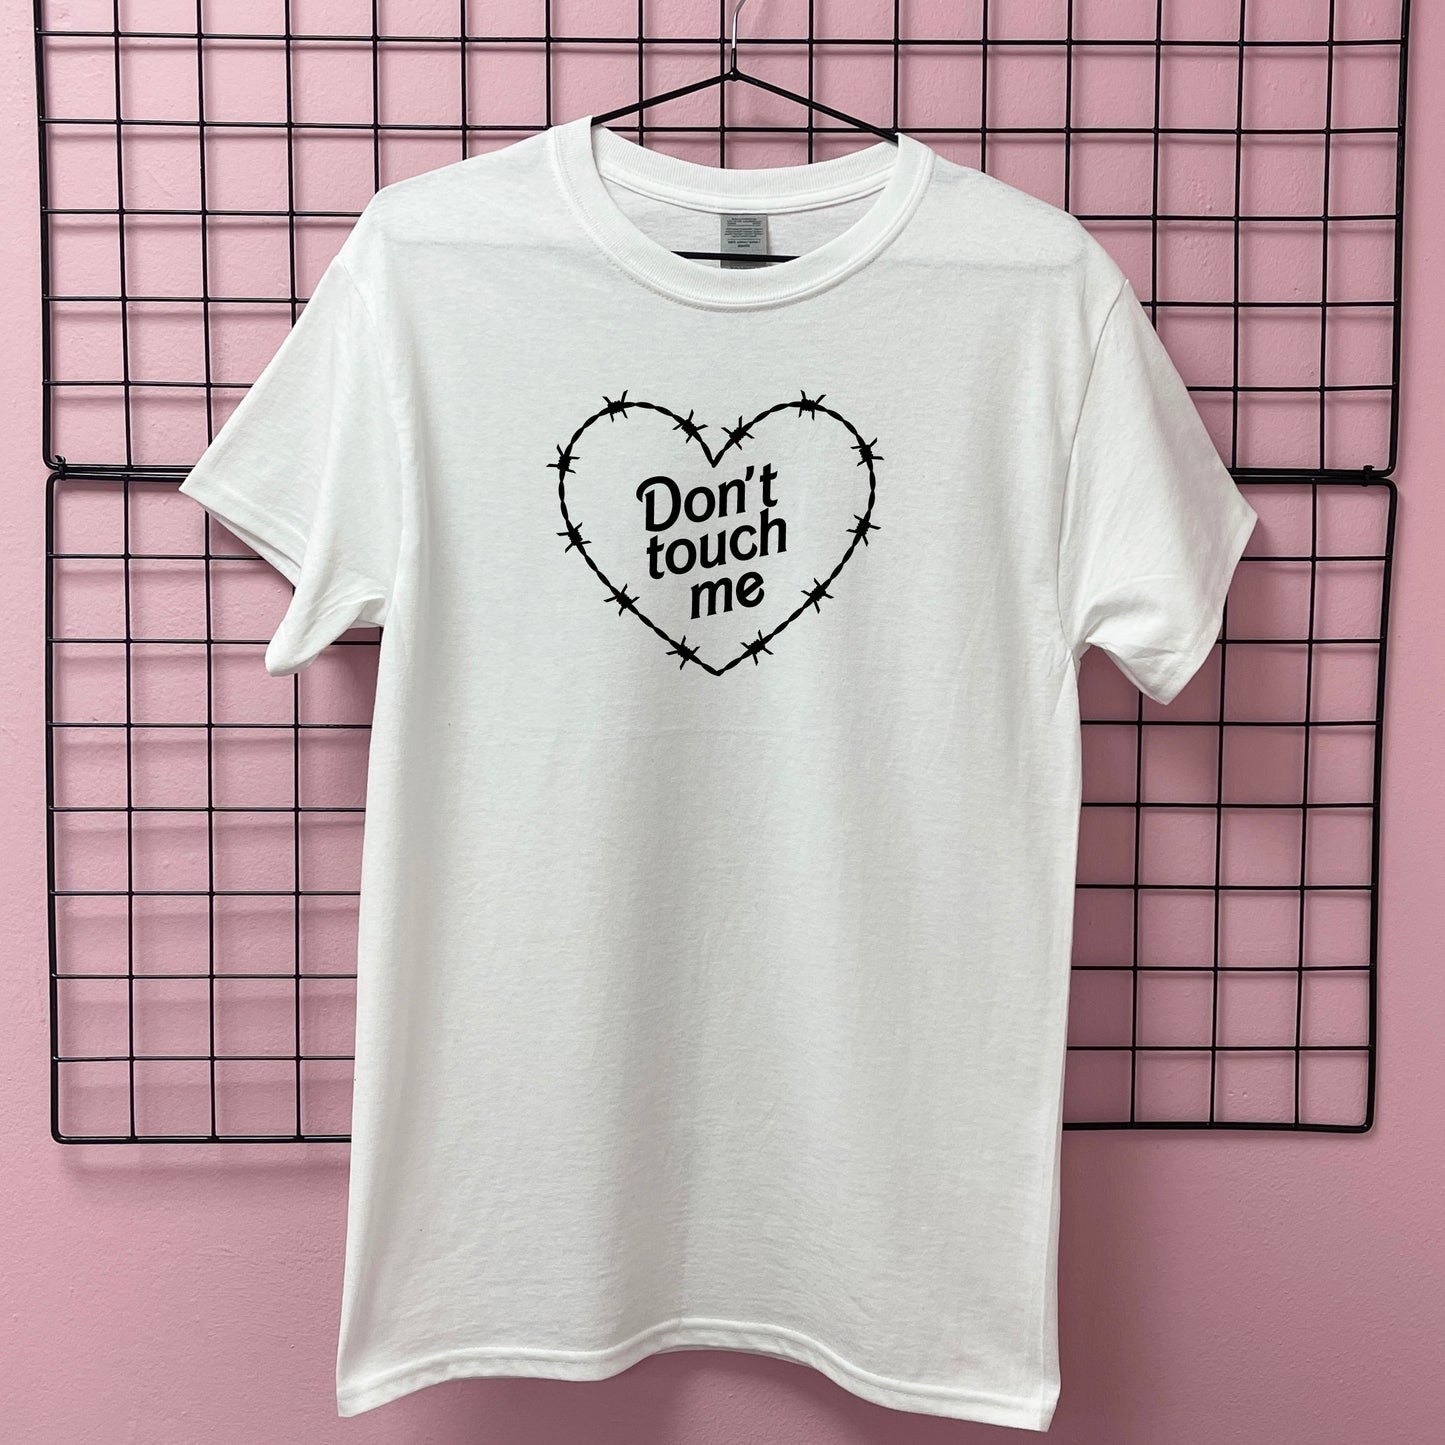 DON'T TOUCH ME HEART T-SHIRT